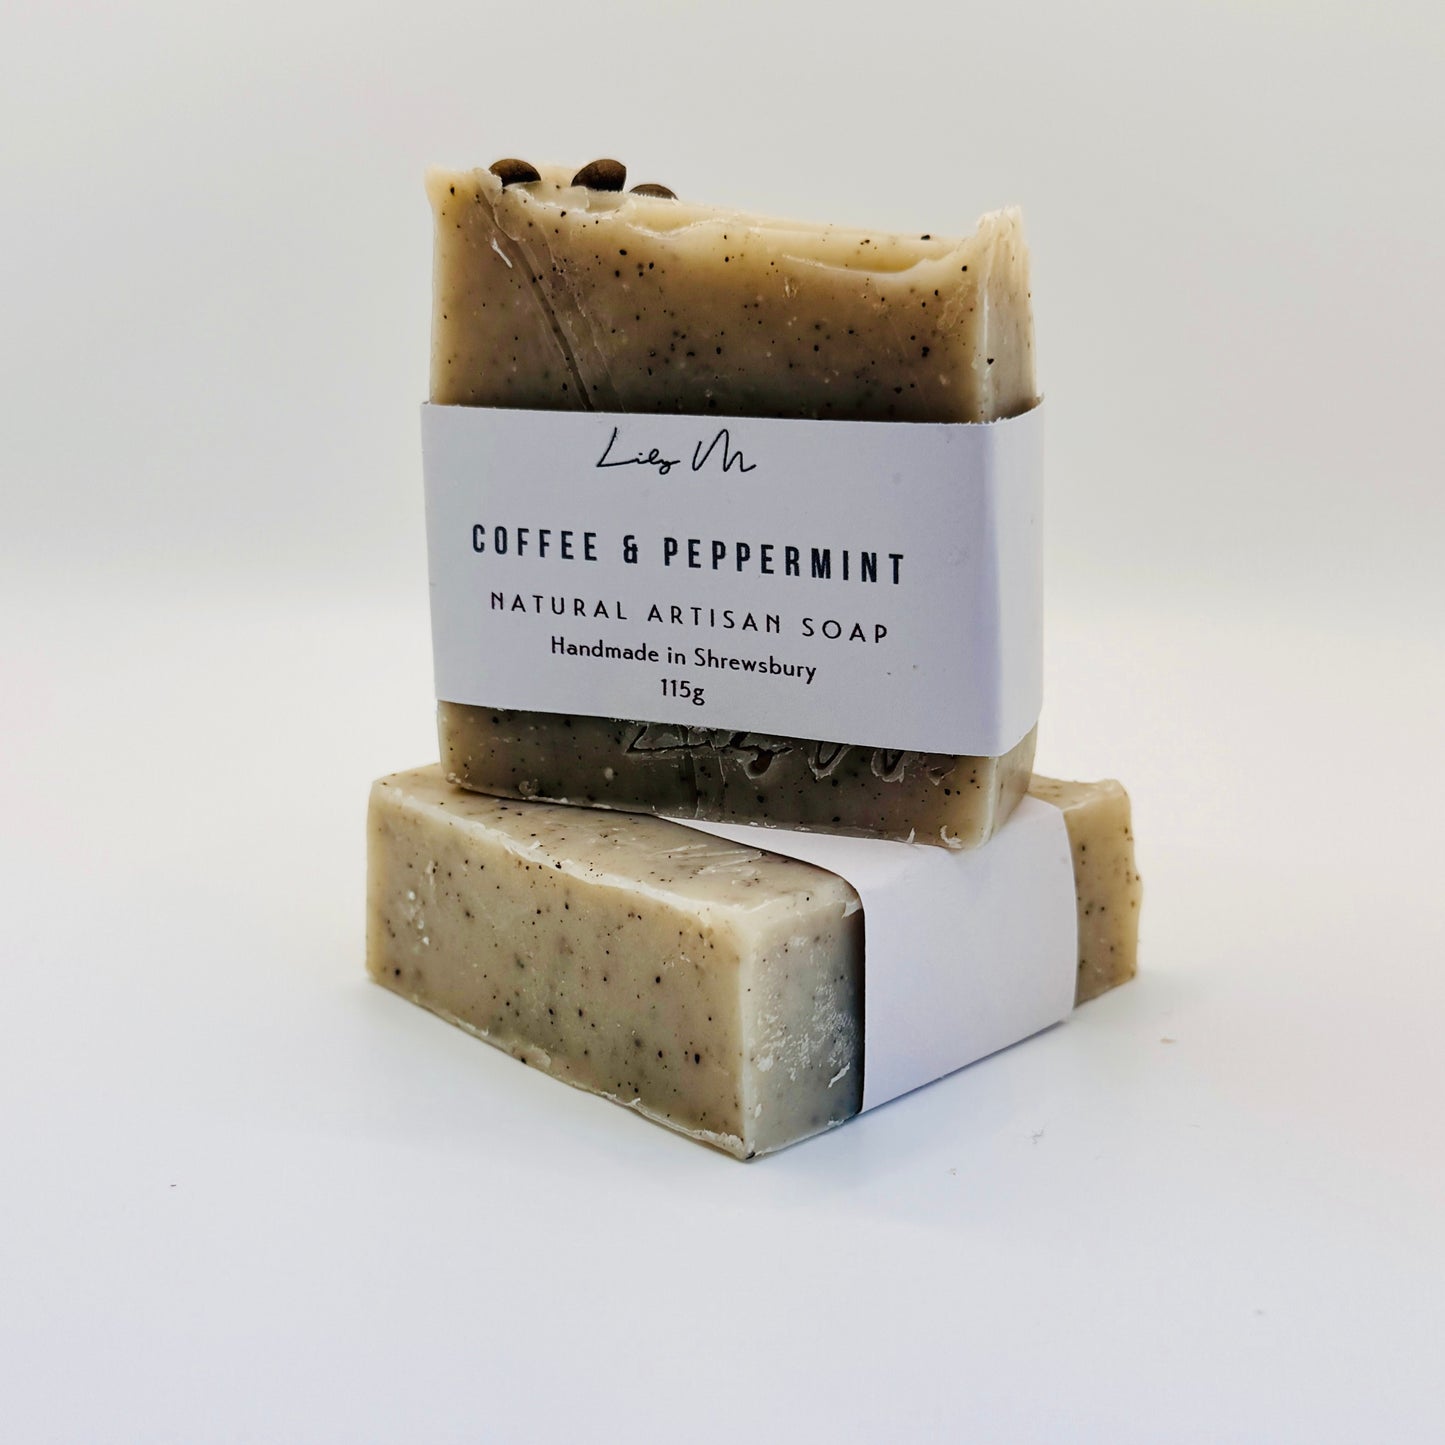 Exfoliating Coffee Grounds & Peppermint Soap Body Bar